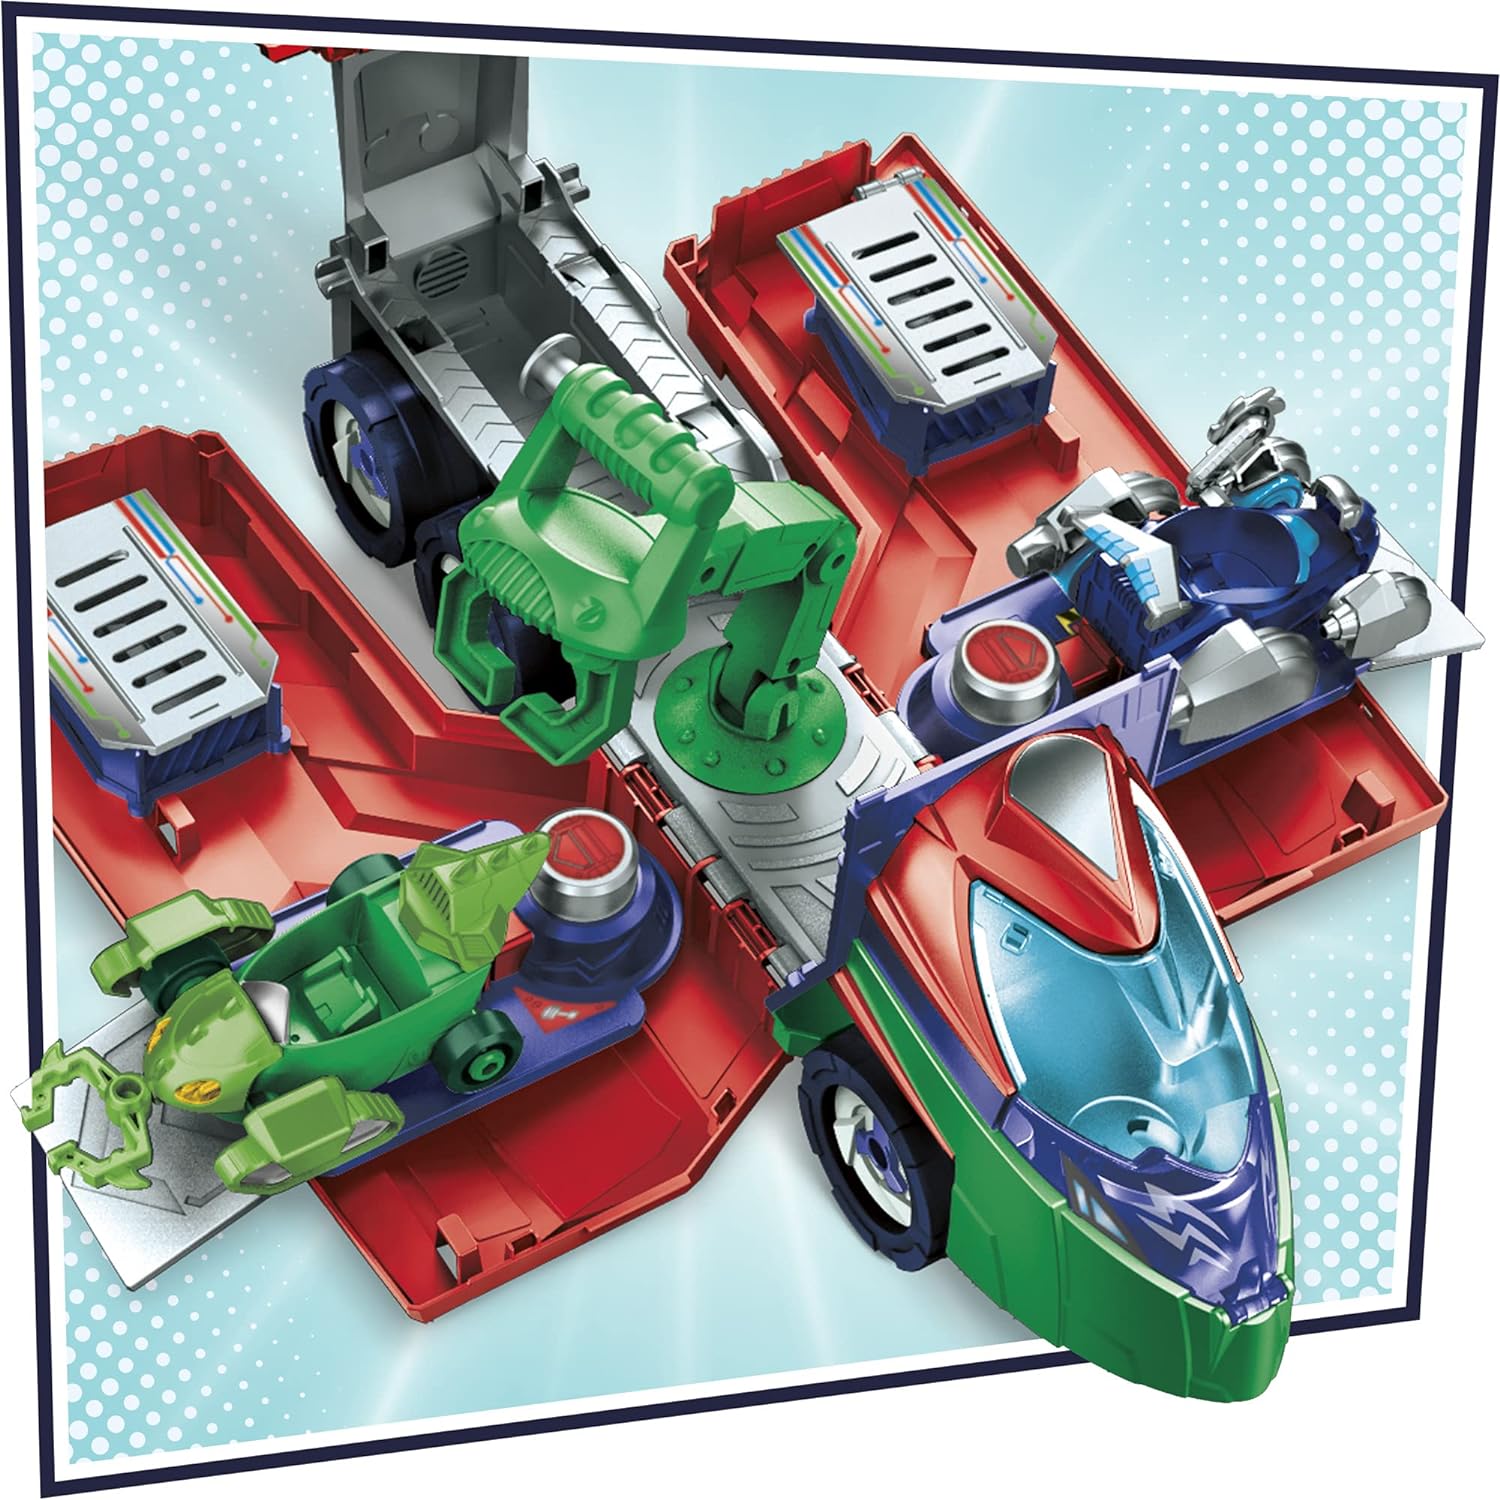 Hasbro PJ Masks PJ Launching Seeker Preschool Toy, Transforming Vehicle Playset with 2 Cars, 2 Action Figures, and More, for Kids …